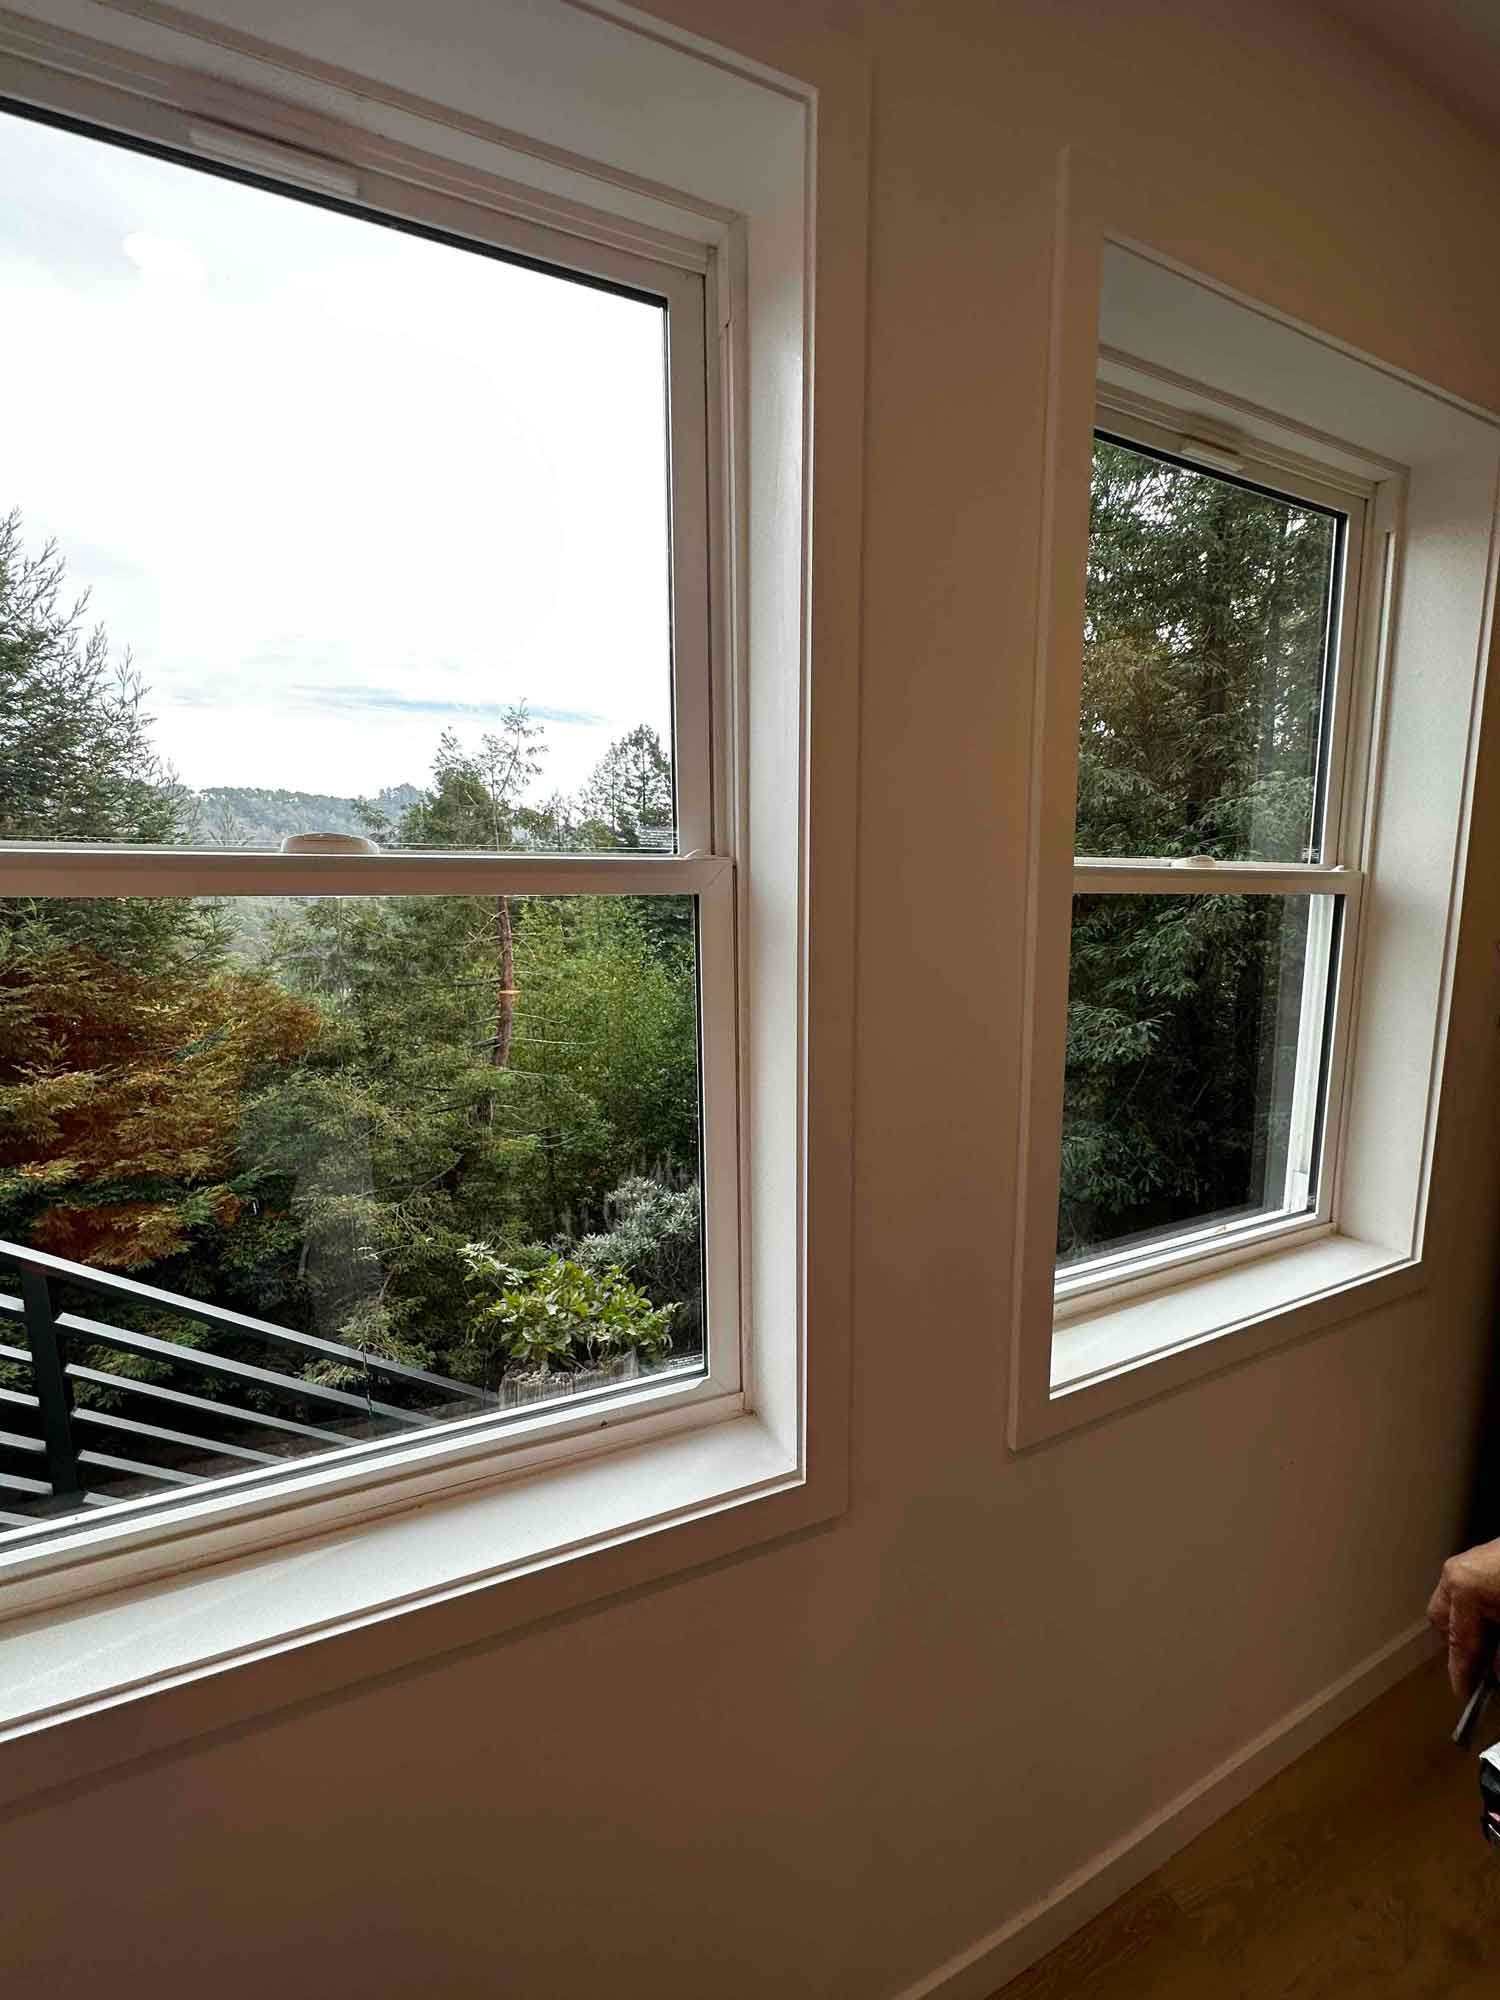 3M Safety Window Film installed in a Berkeley, CA by ClimatePro.